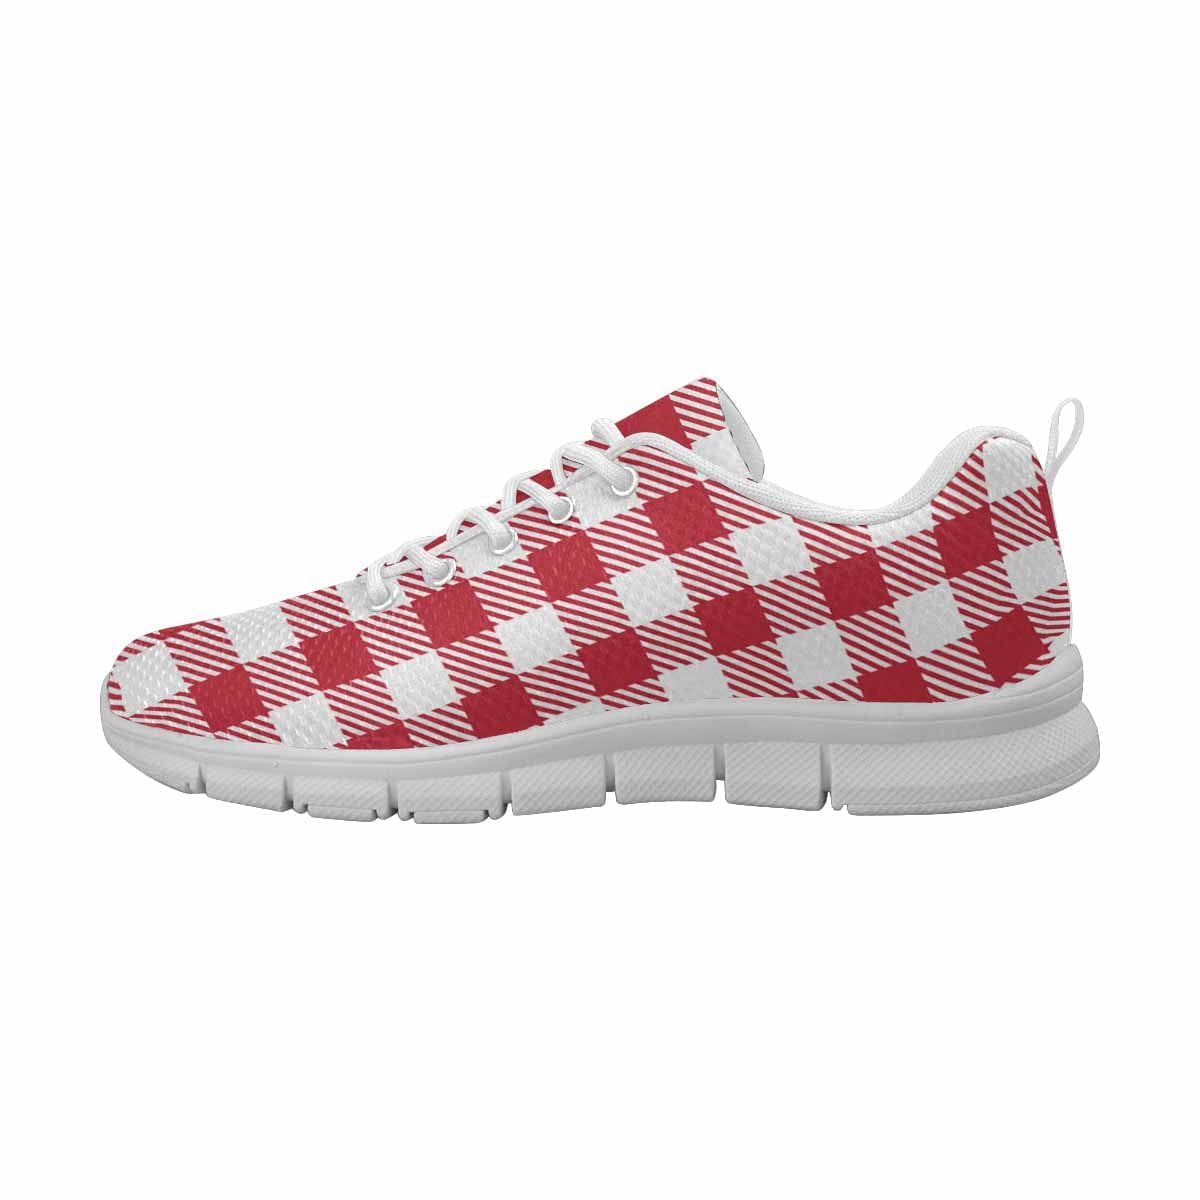 Sneakers For Men Buffalo Plaid Red And White - Running Shoes Dg863 - Mens